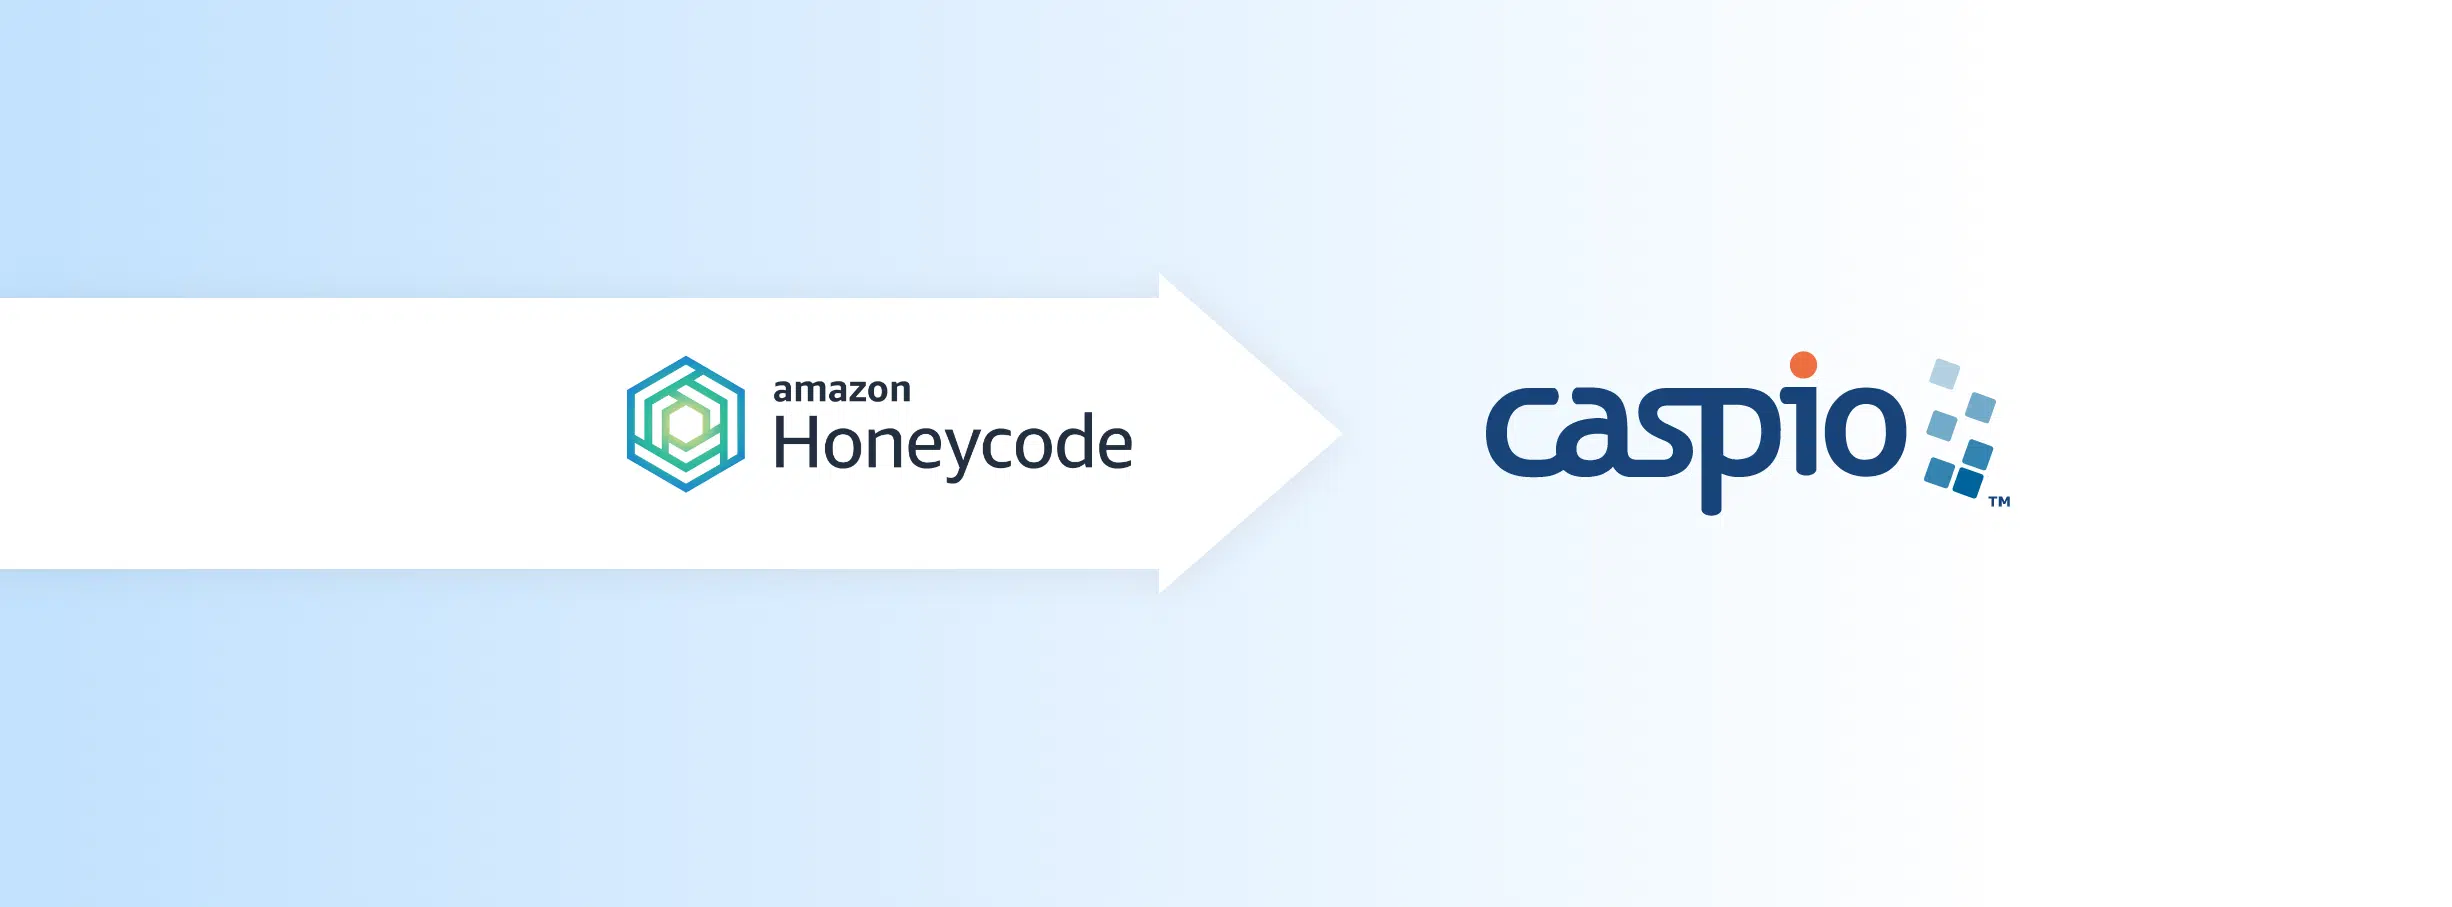 As Amazon Abandons Honeycode Users, Caspio Extends a Warm Welcome